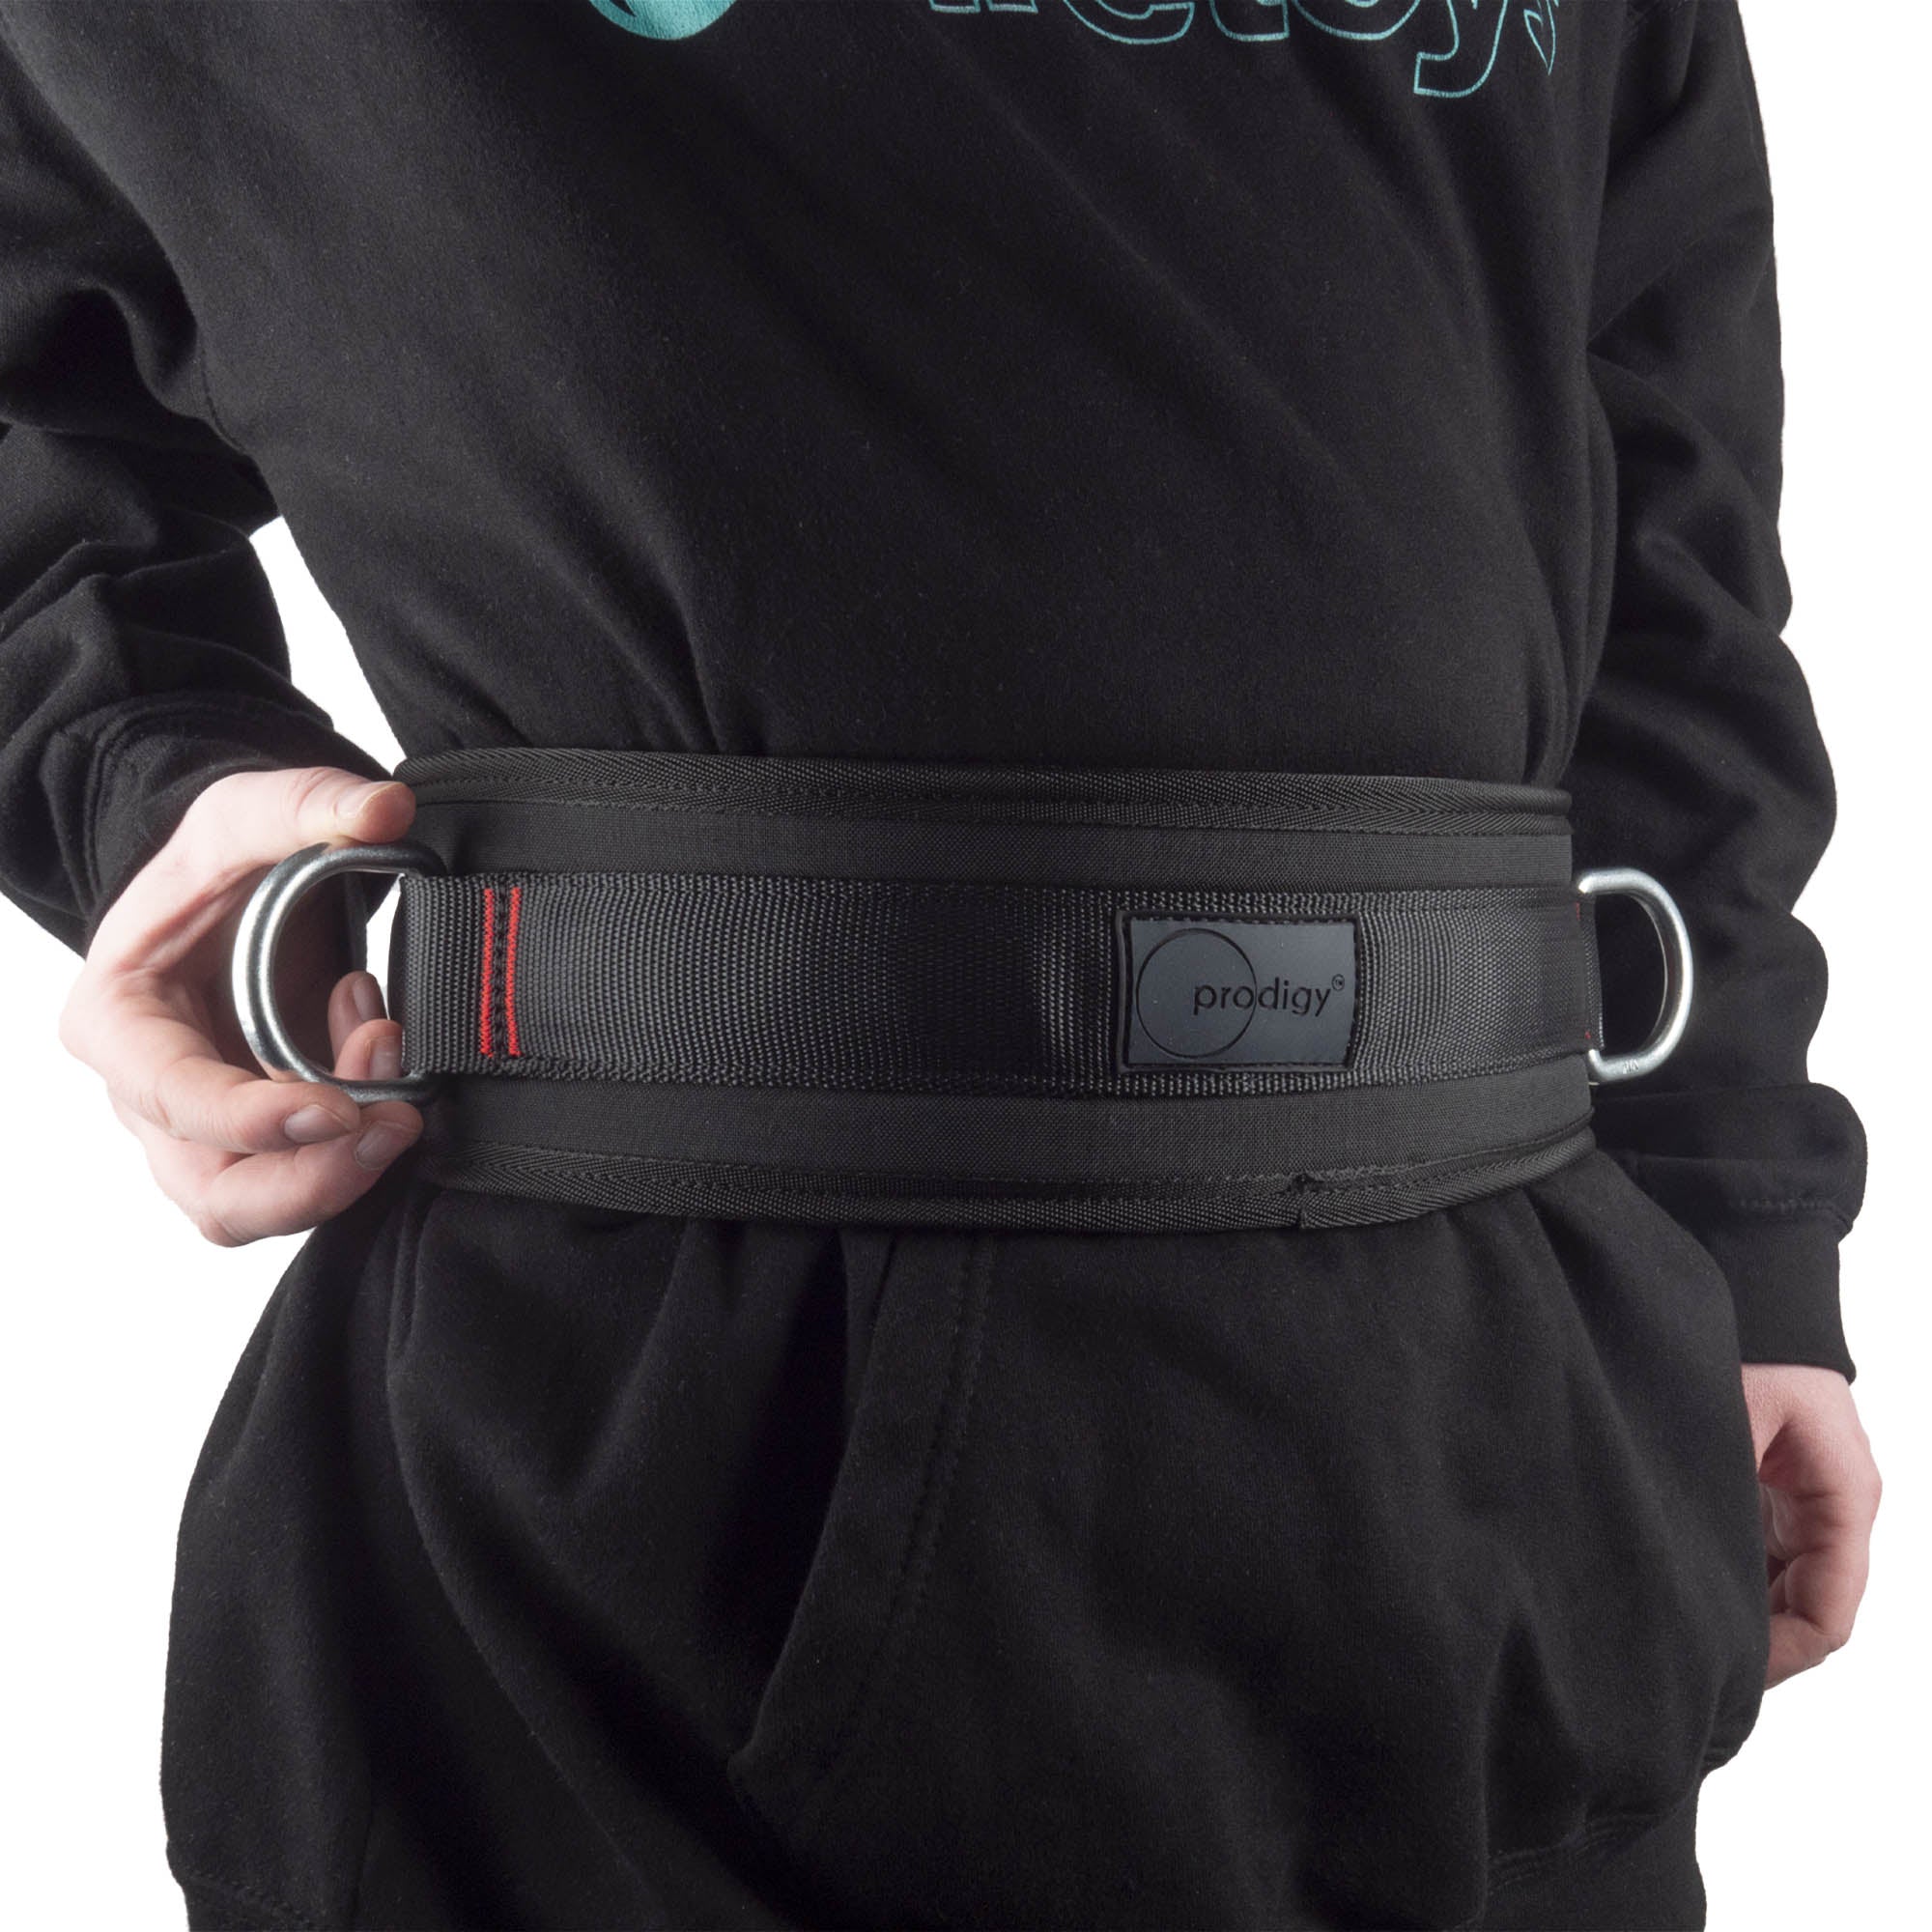 Prodigy Acro Lunge Belts size 3 worn showing ring